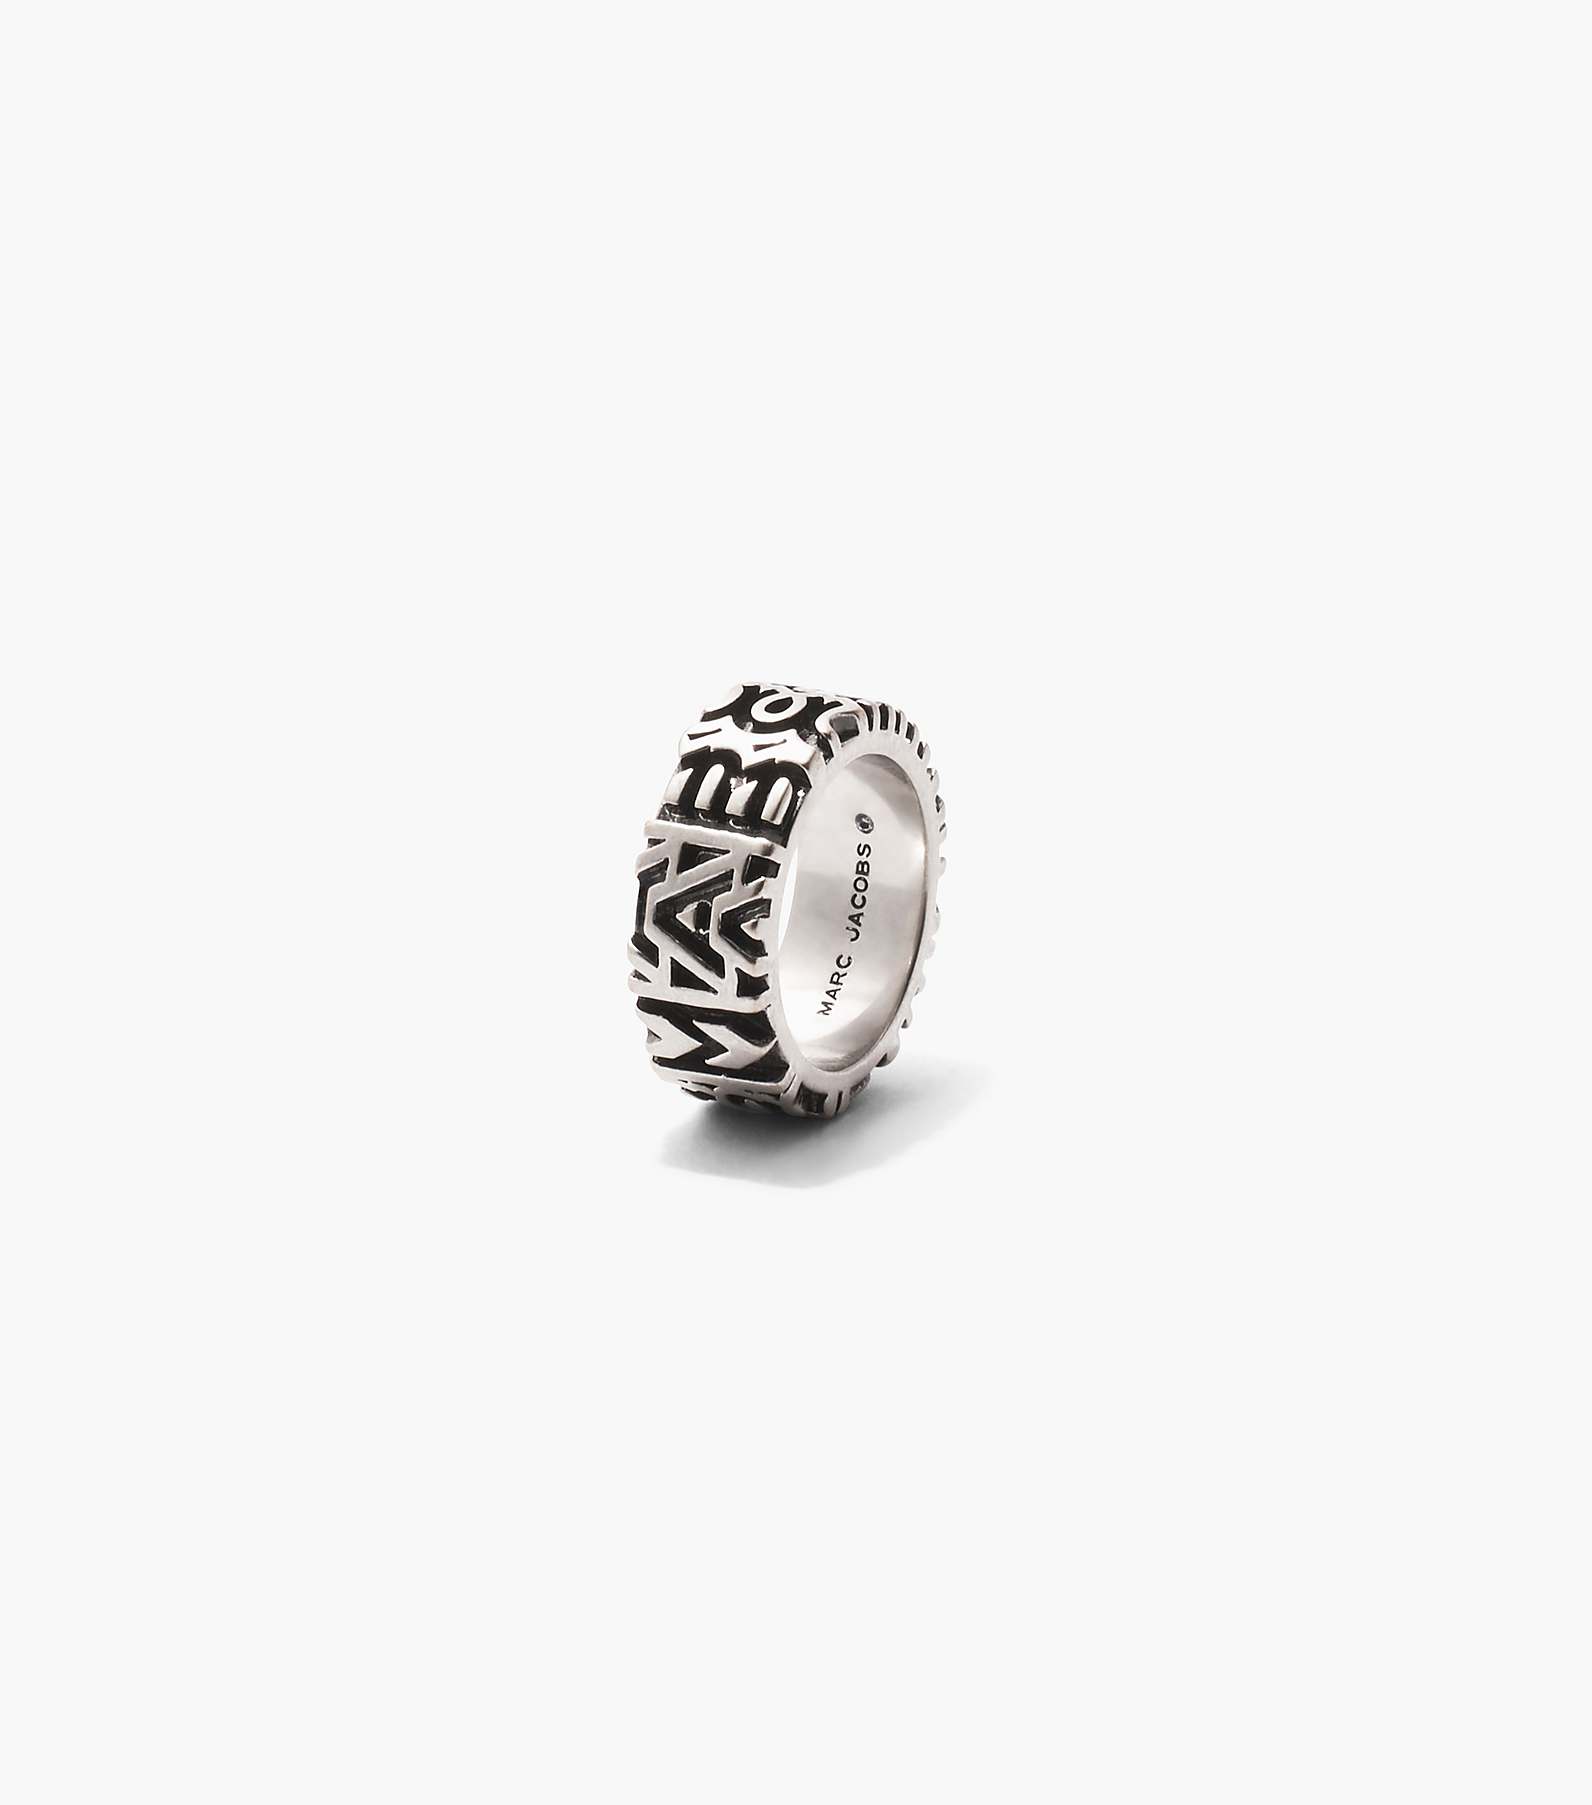 The Monogram Engraved Ring(View All Jewelry)